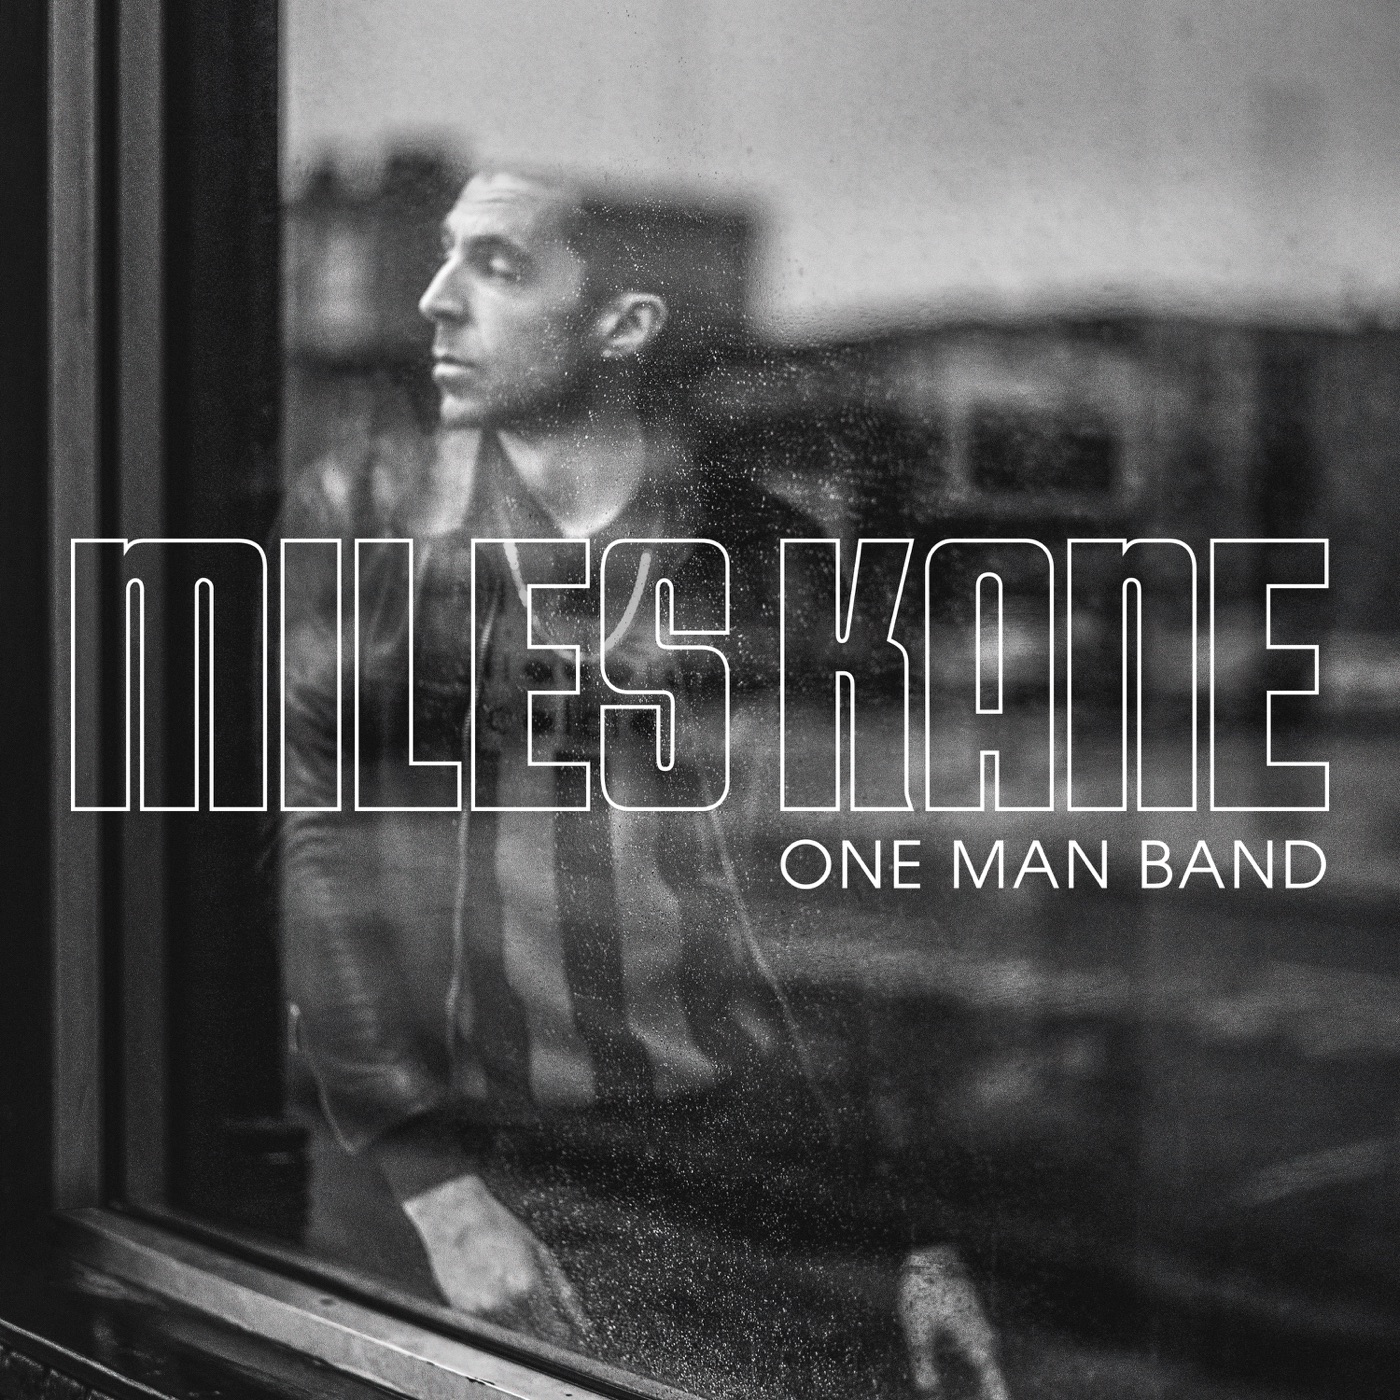 One Man Band by Miles Kane